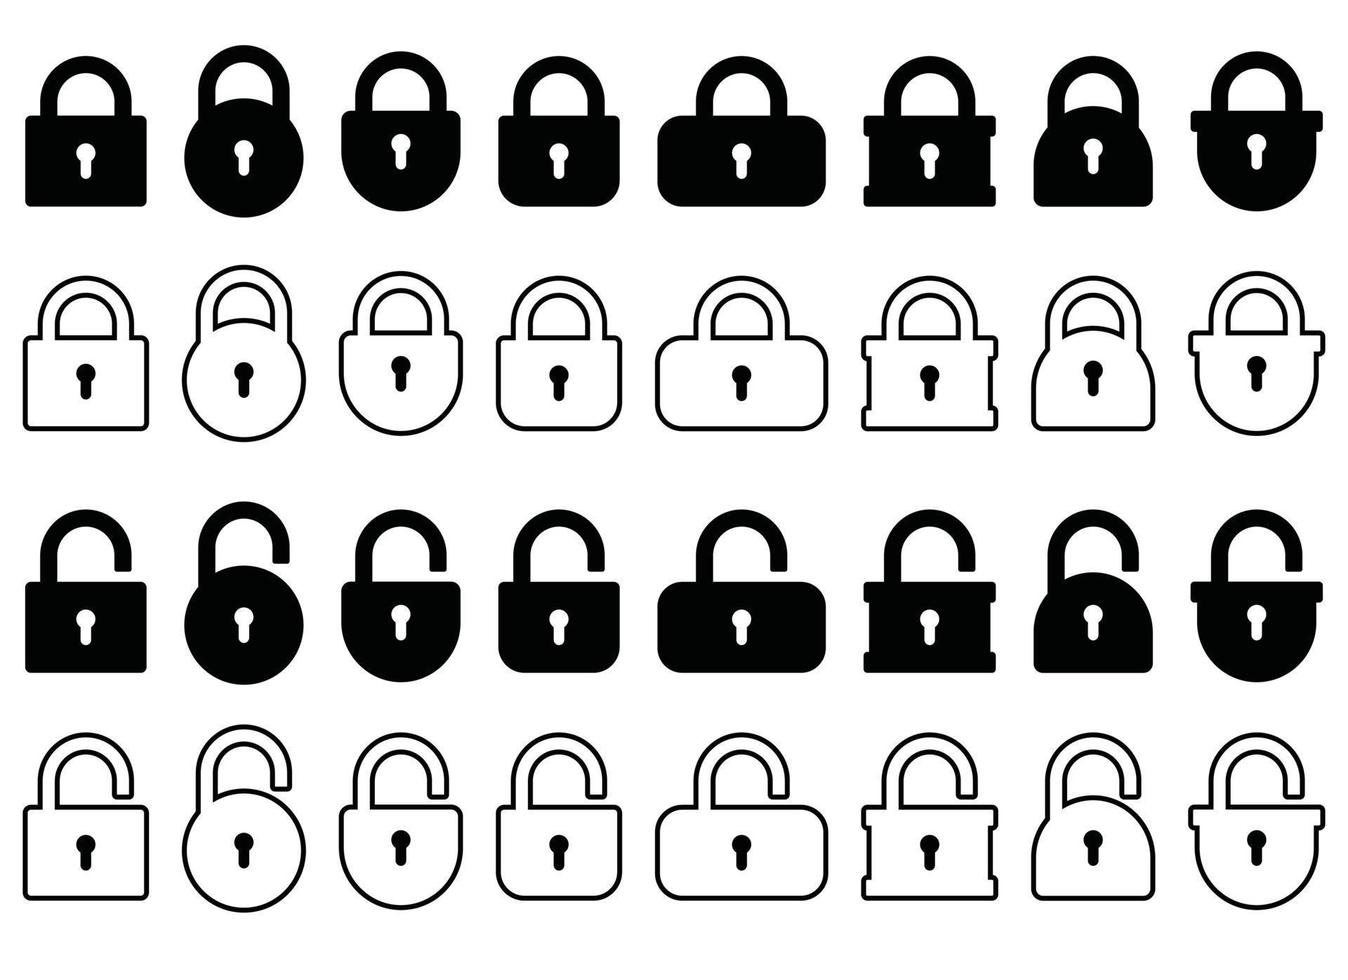 Opened and closed padlock icon in flat style. Lock vector illustration. Security check sign